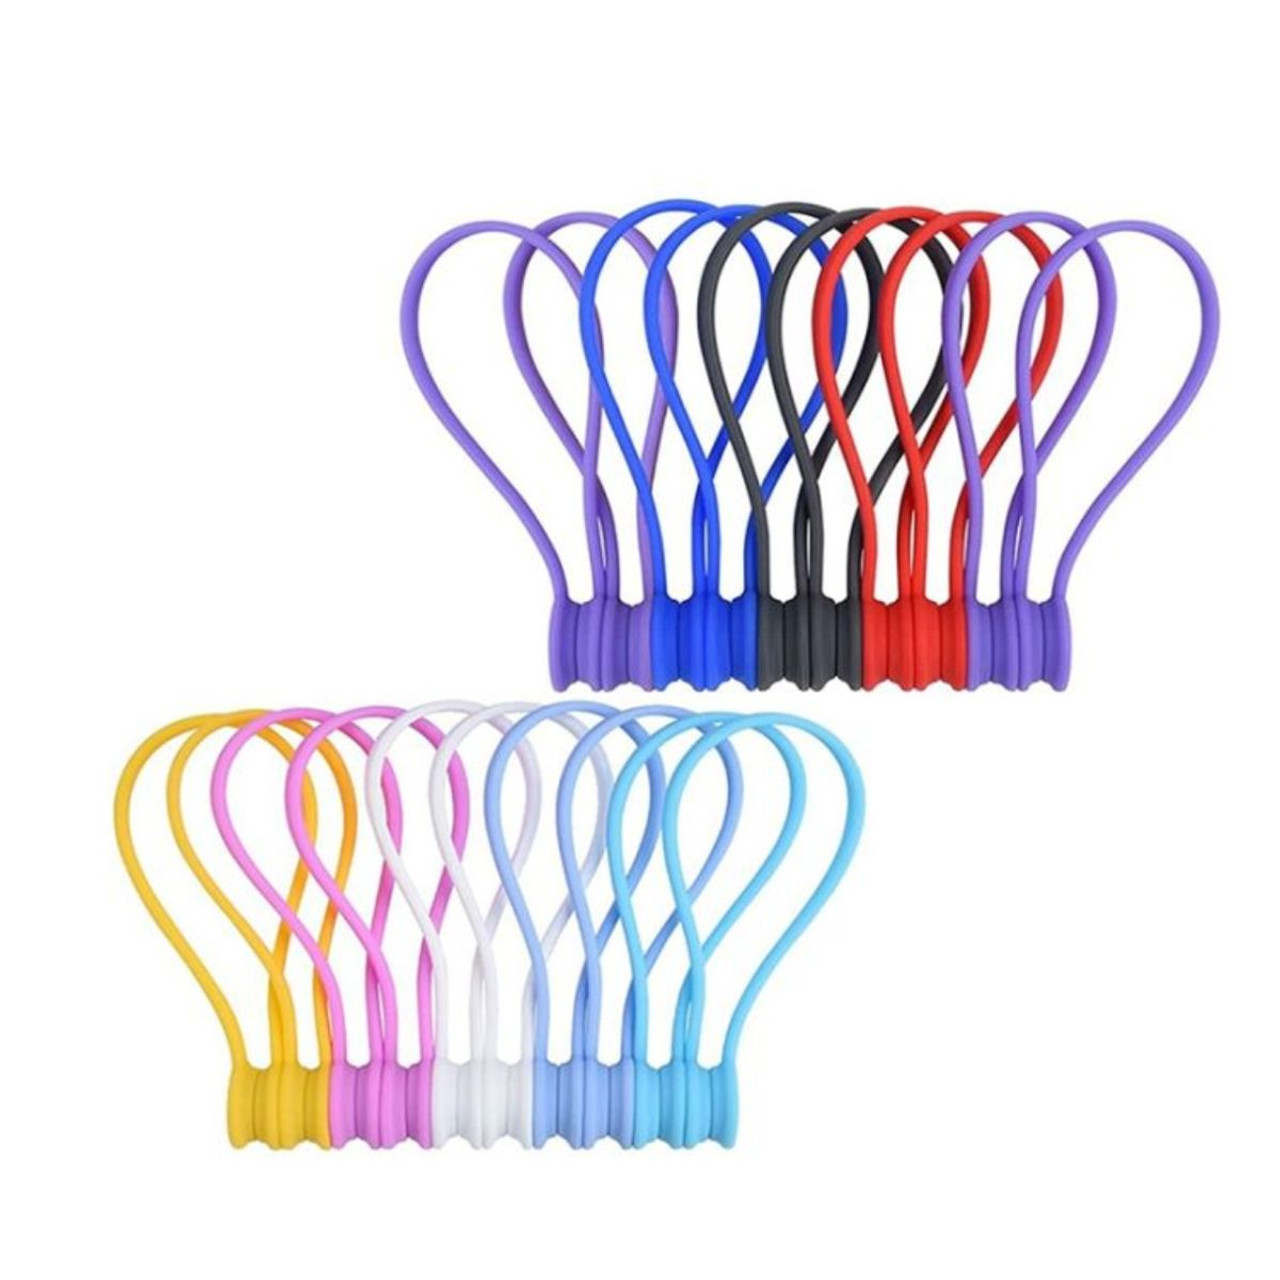 Magnetic Cable Organizers (7-Pack) product image